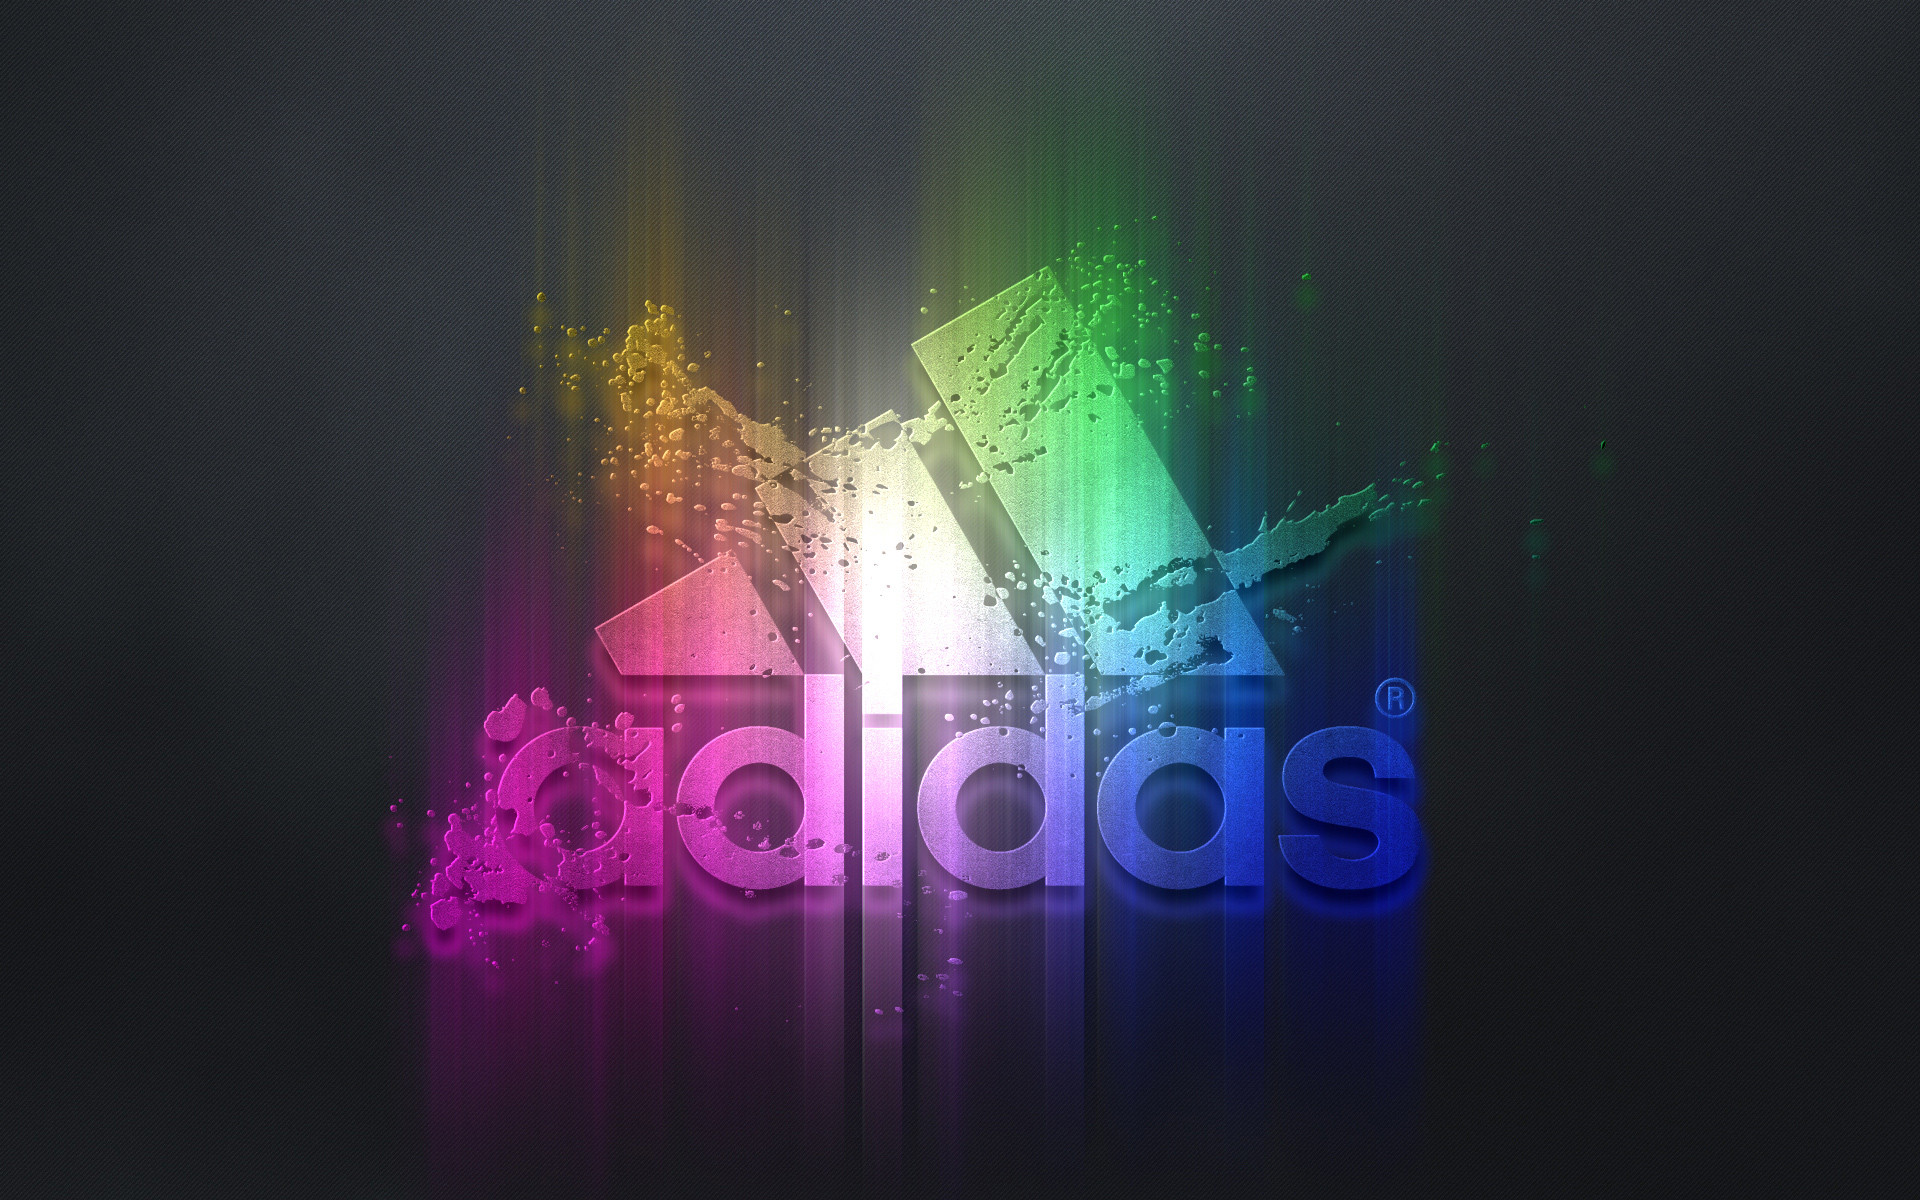 1920x1200 Adidas Background For Desktop Wallpaper 1920 x 1200 px 692.31 KB messi 2016  tumblr colorful soccer